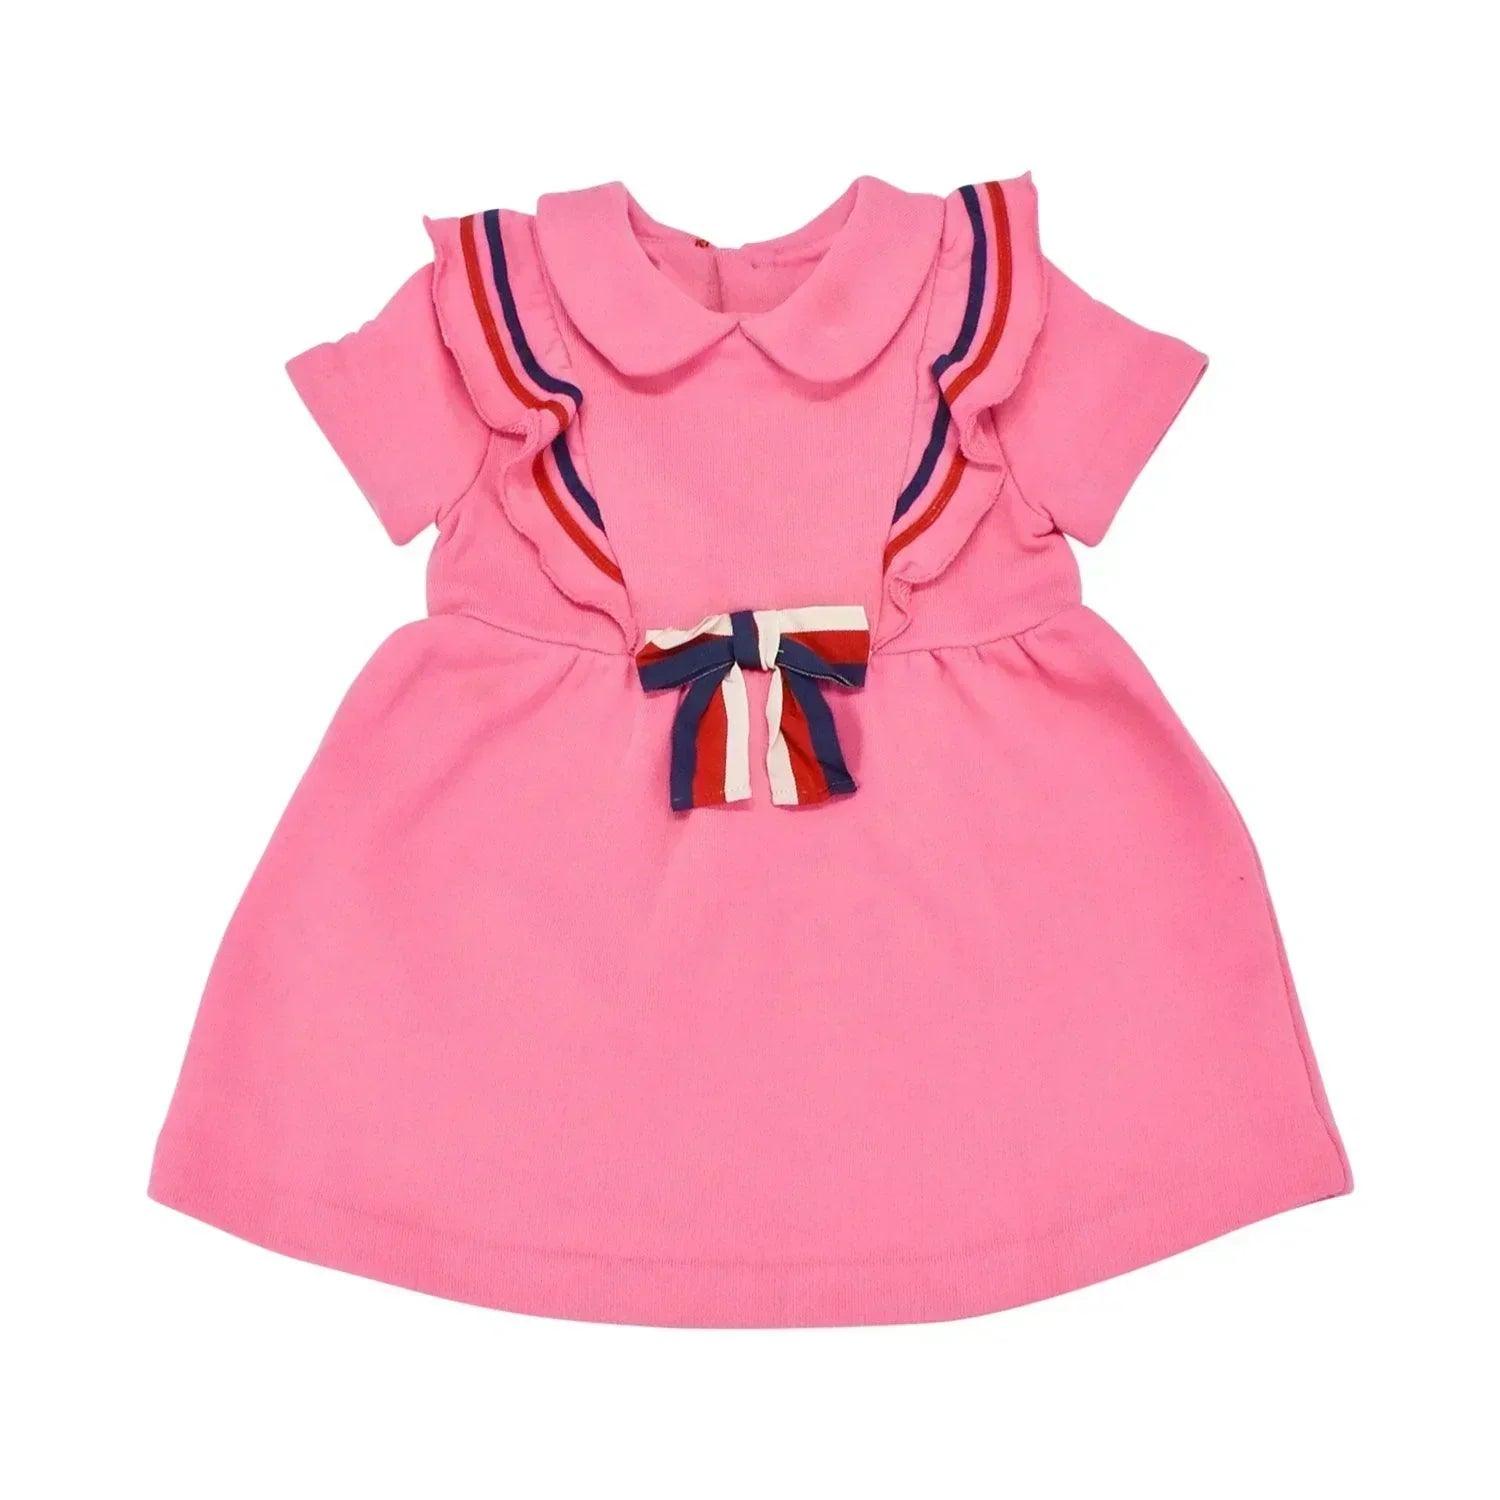 Gucci Dress - Baby 9-12M - Fashionably Yours